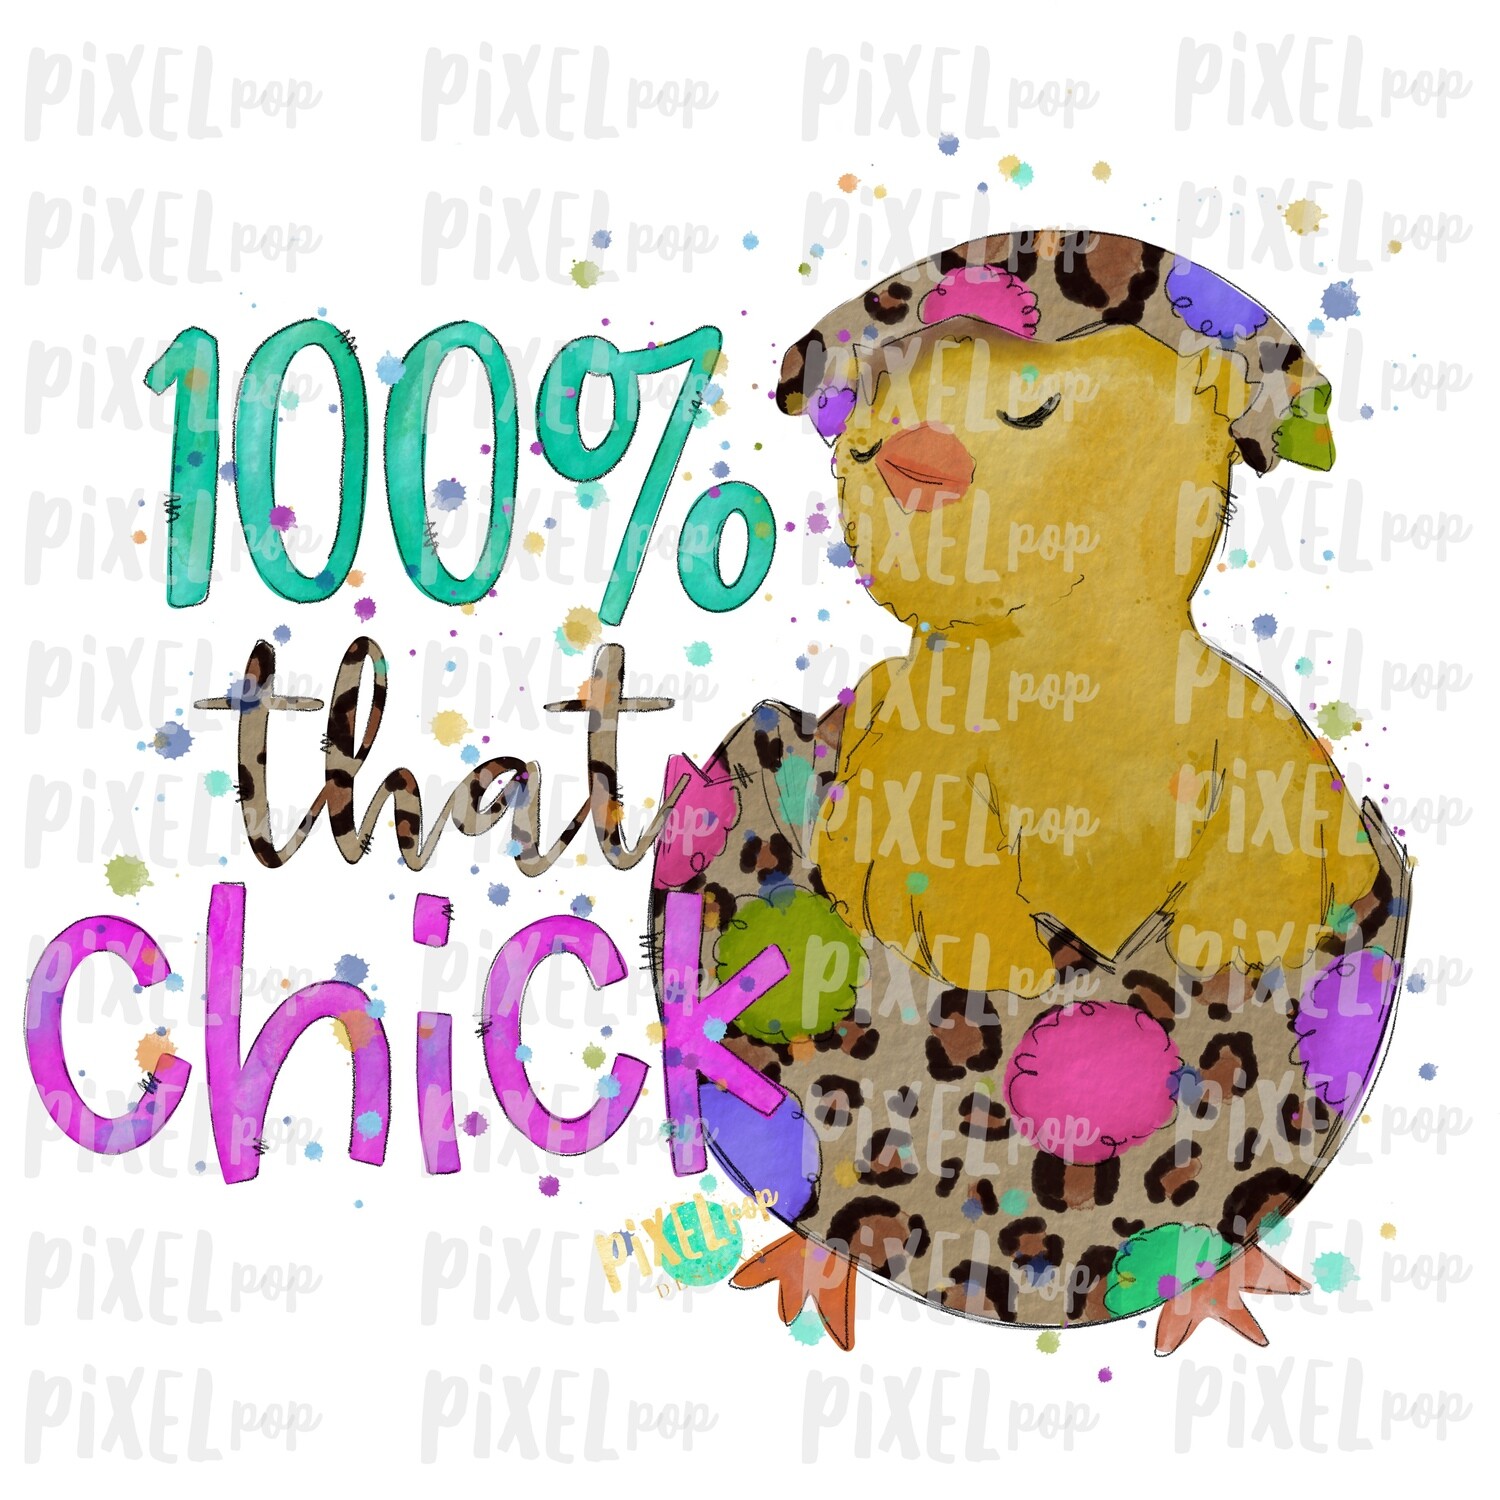 100% That Chick in Egg Leopard Watercolor Sublimation Design PNG | Easter Design | Chick Design | Easter PNG | Sublimation Design | Watercolor Art